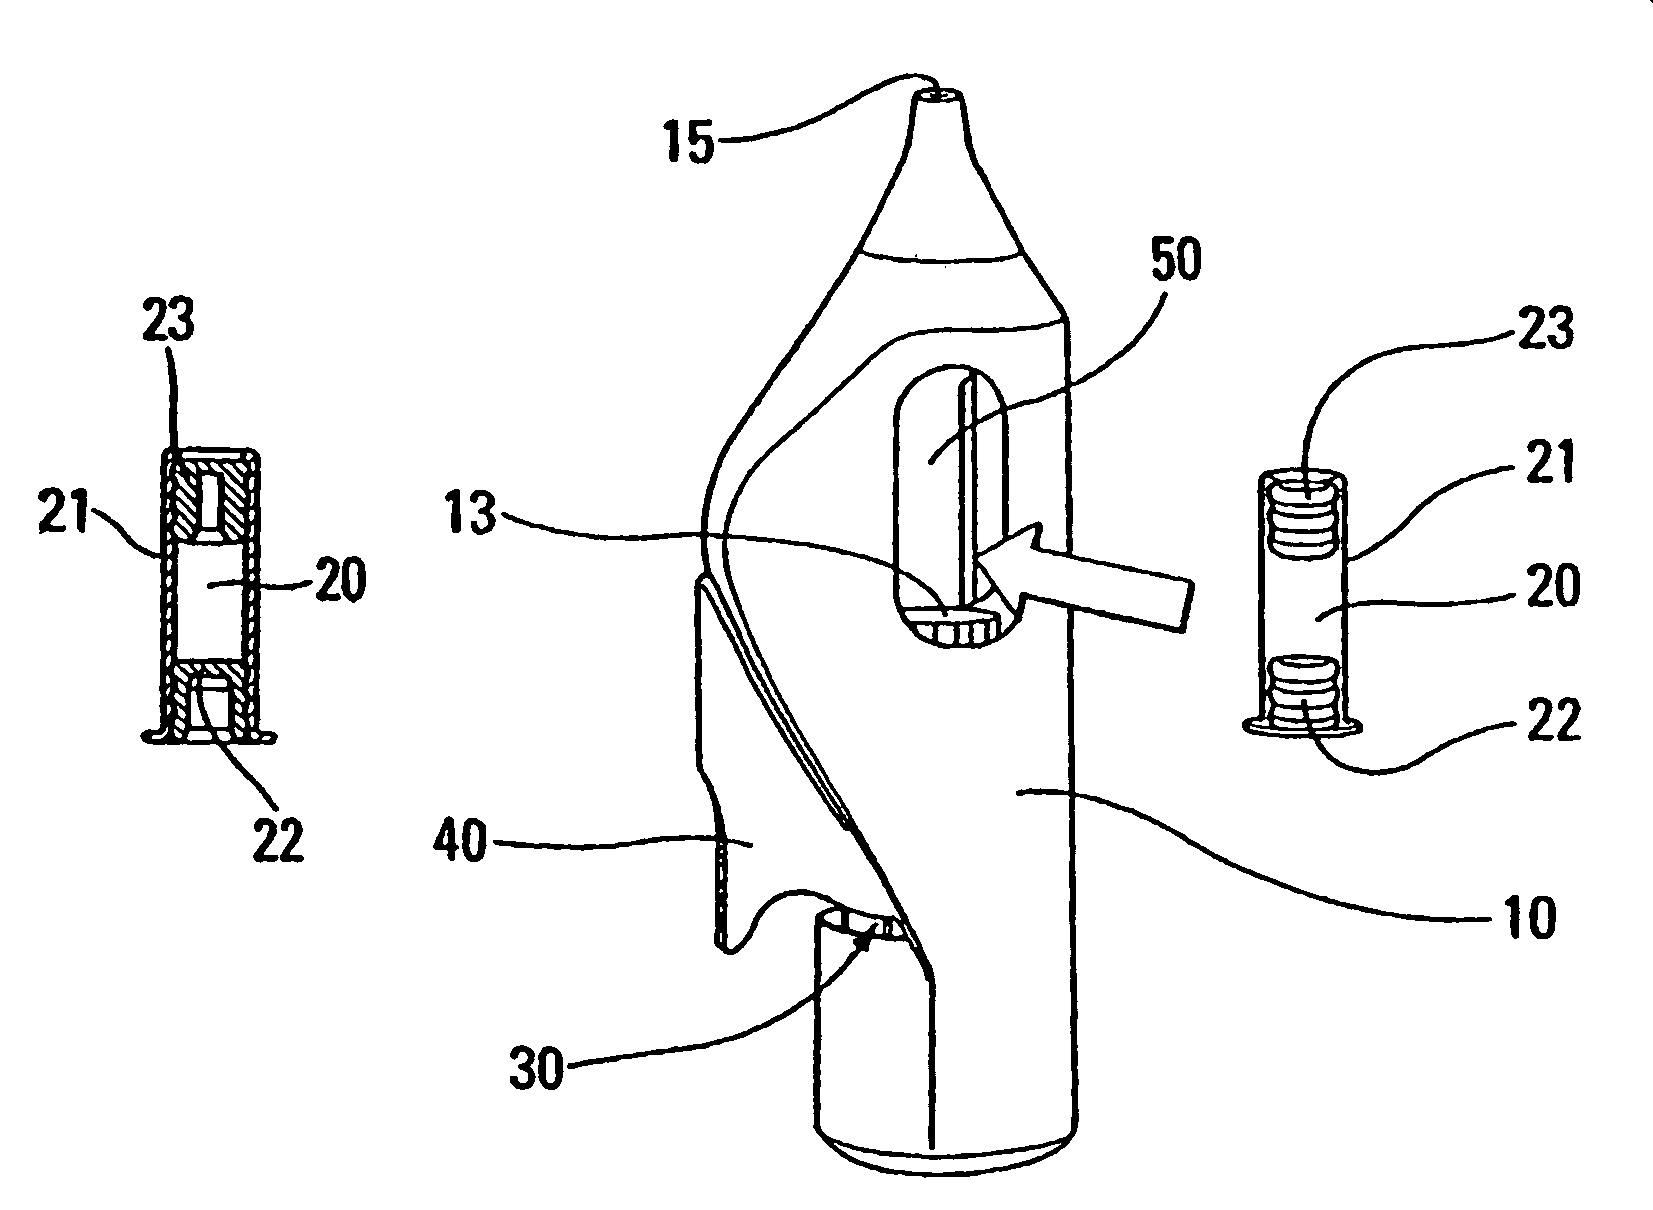 Fluid product spraying device